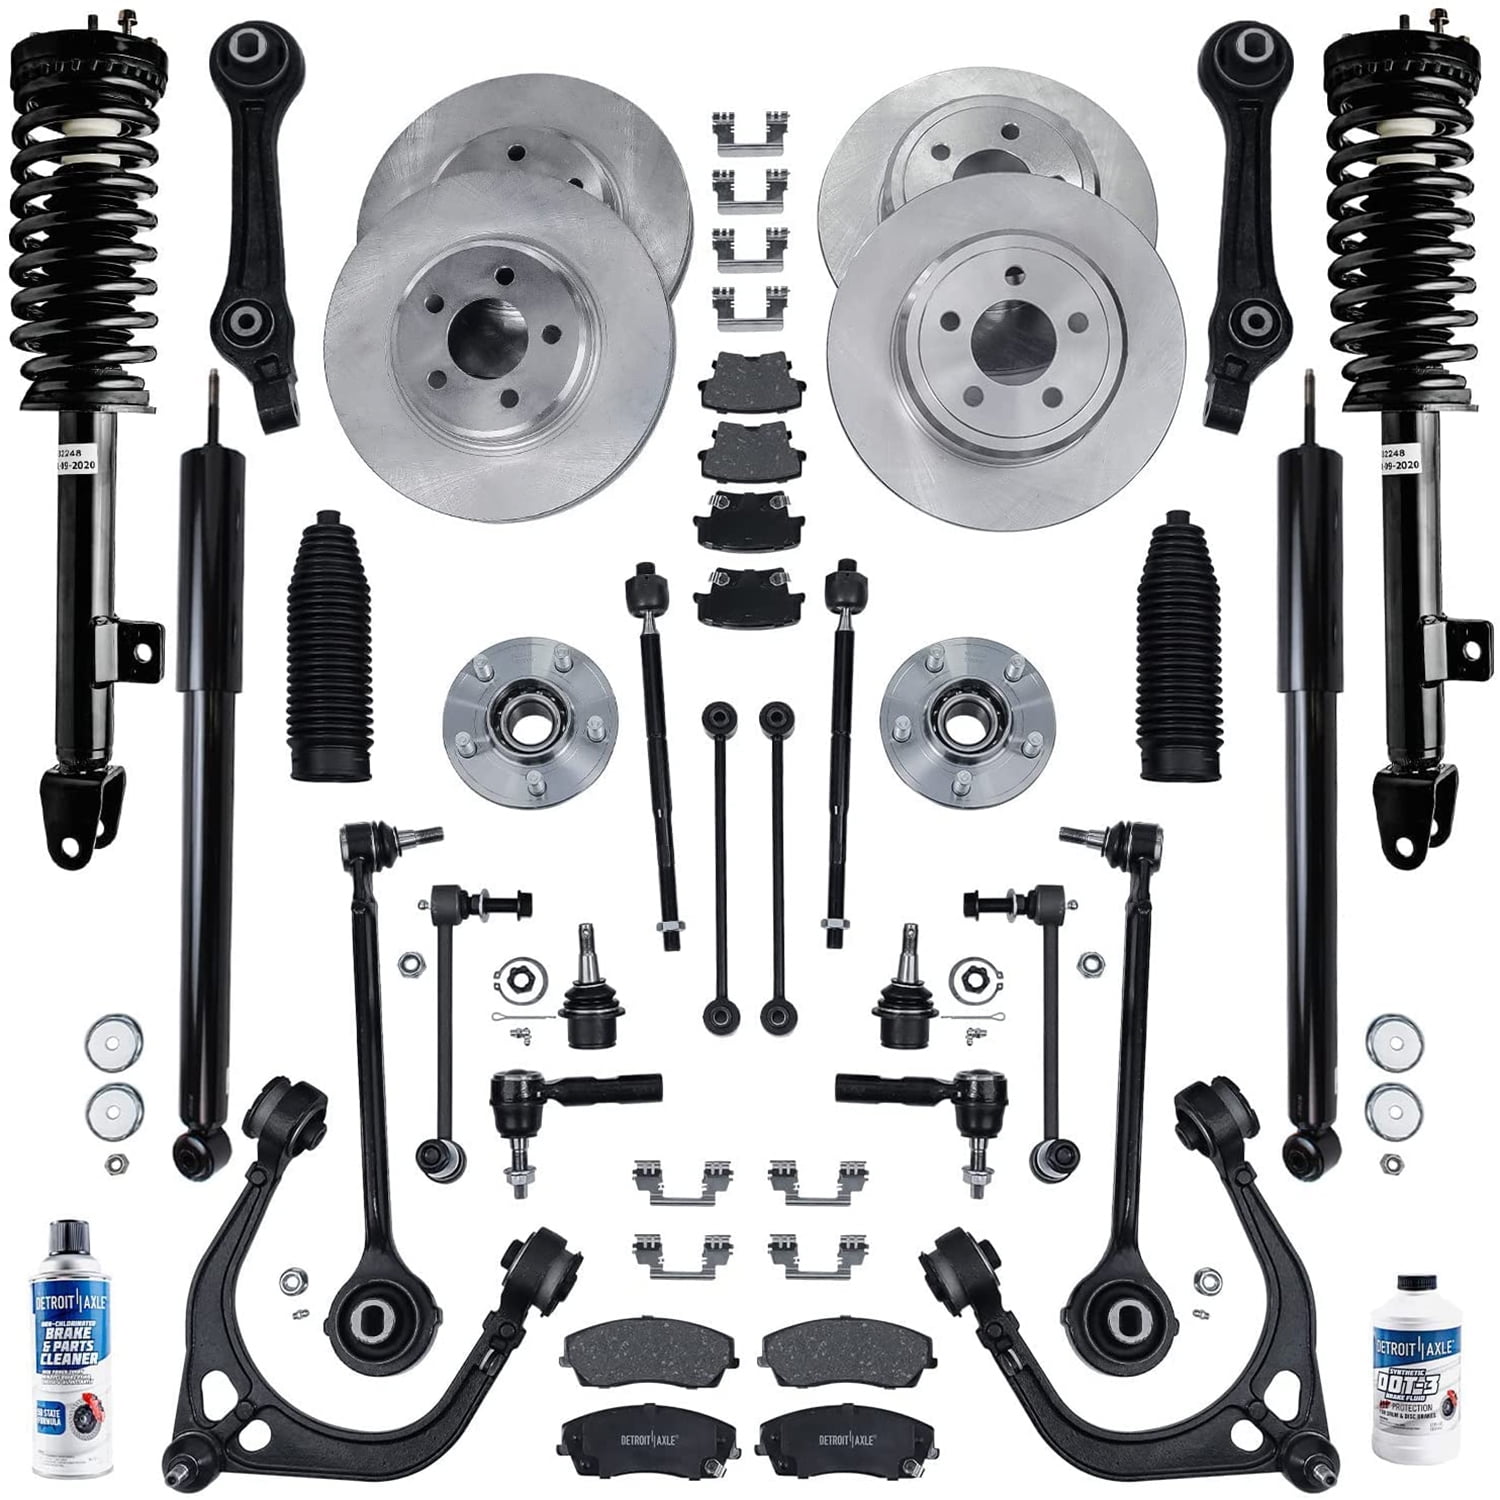 Detroit Axle - 34pc RWD Front Rear Brakes Suspension Kit Replacement for  Chrysler 300 Dodge Charger 